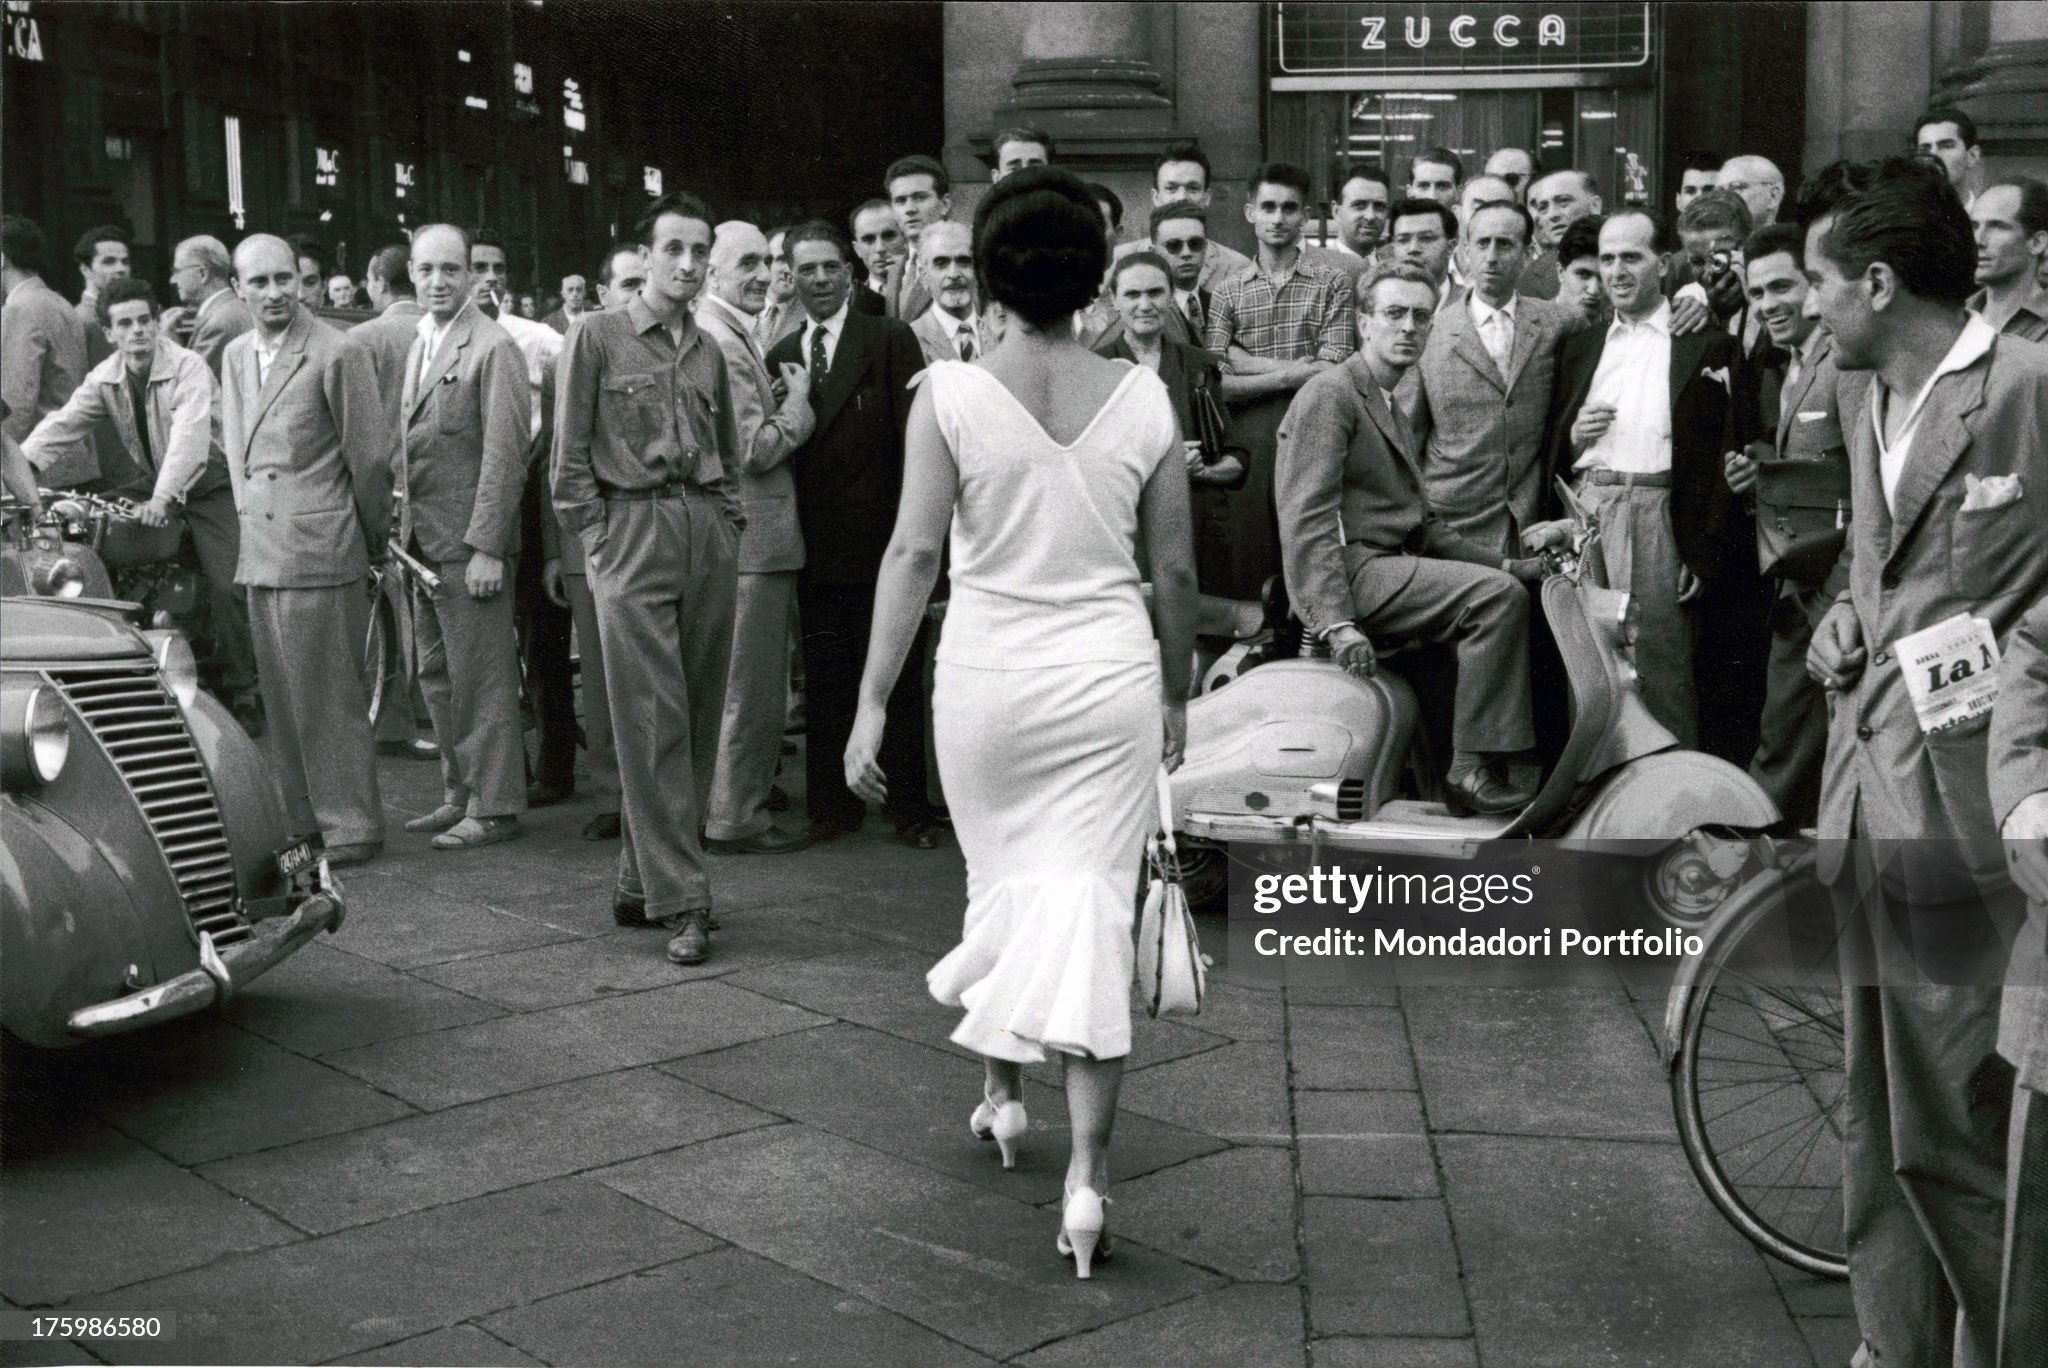 Young actress and circus performer Moira Orfei walks towards the Galleria Vittorio Emanuele II in Milan in 1954 while a large group of men turn to look at her.